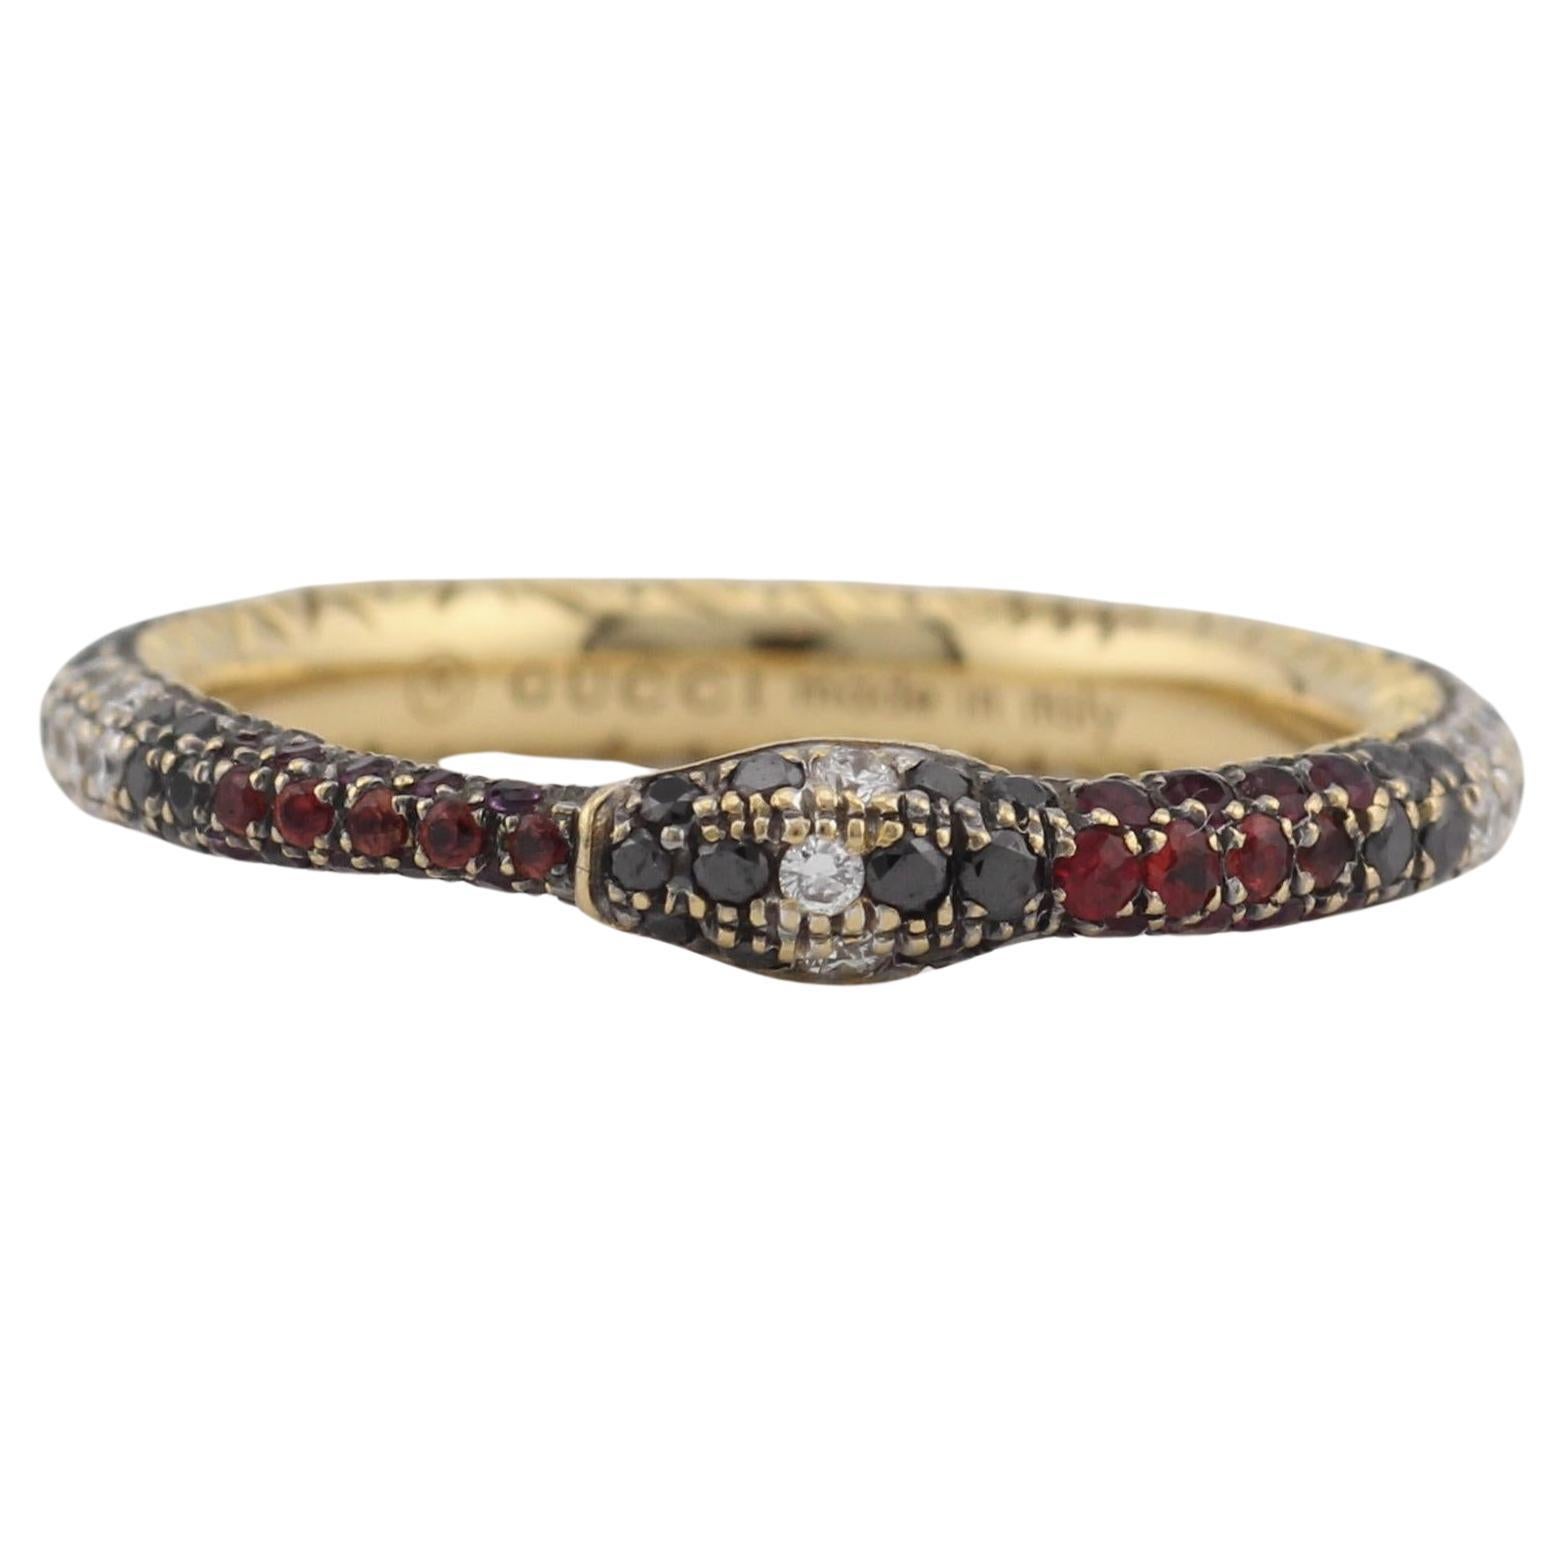 Gucci Ouroboros Gemstone 18K Yellow Gold Kingsnake Band Ring Size 5 For Sale